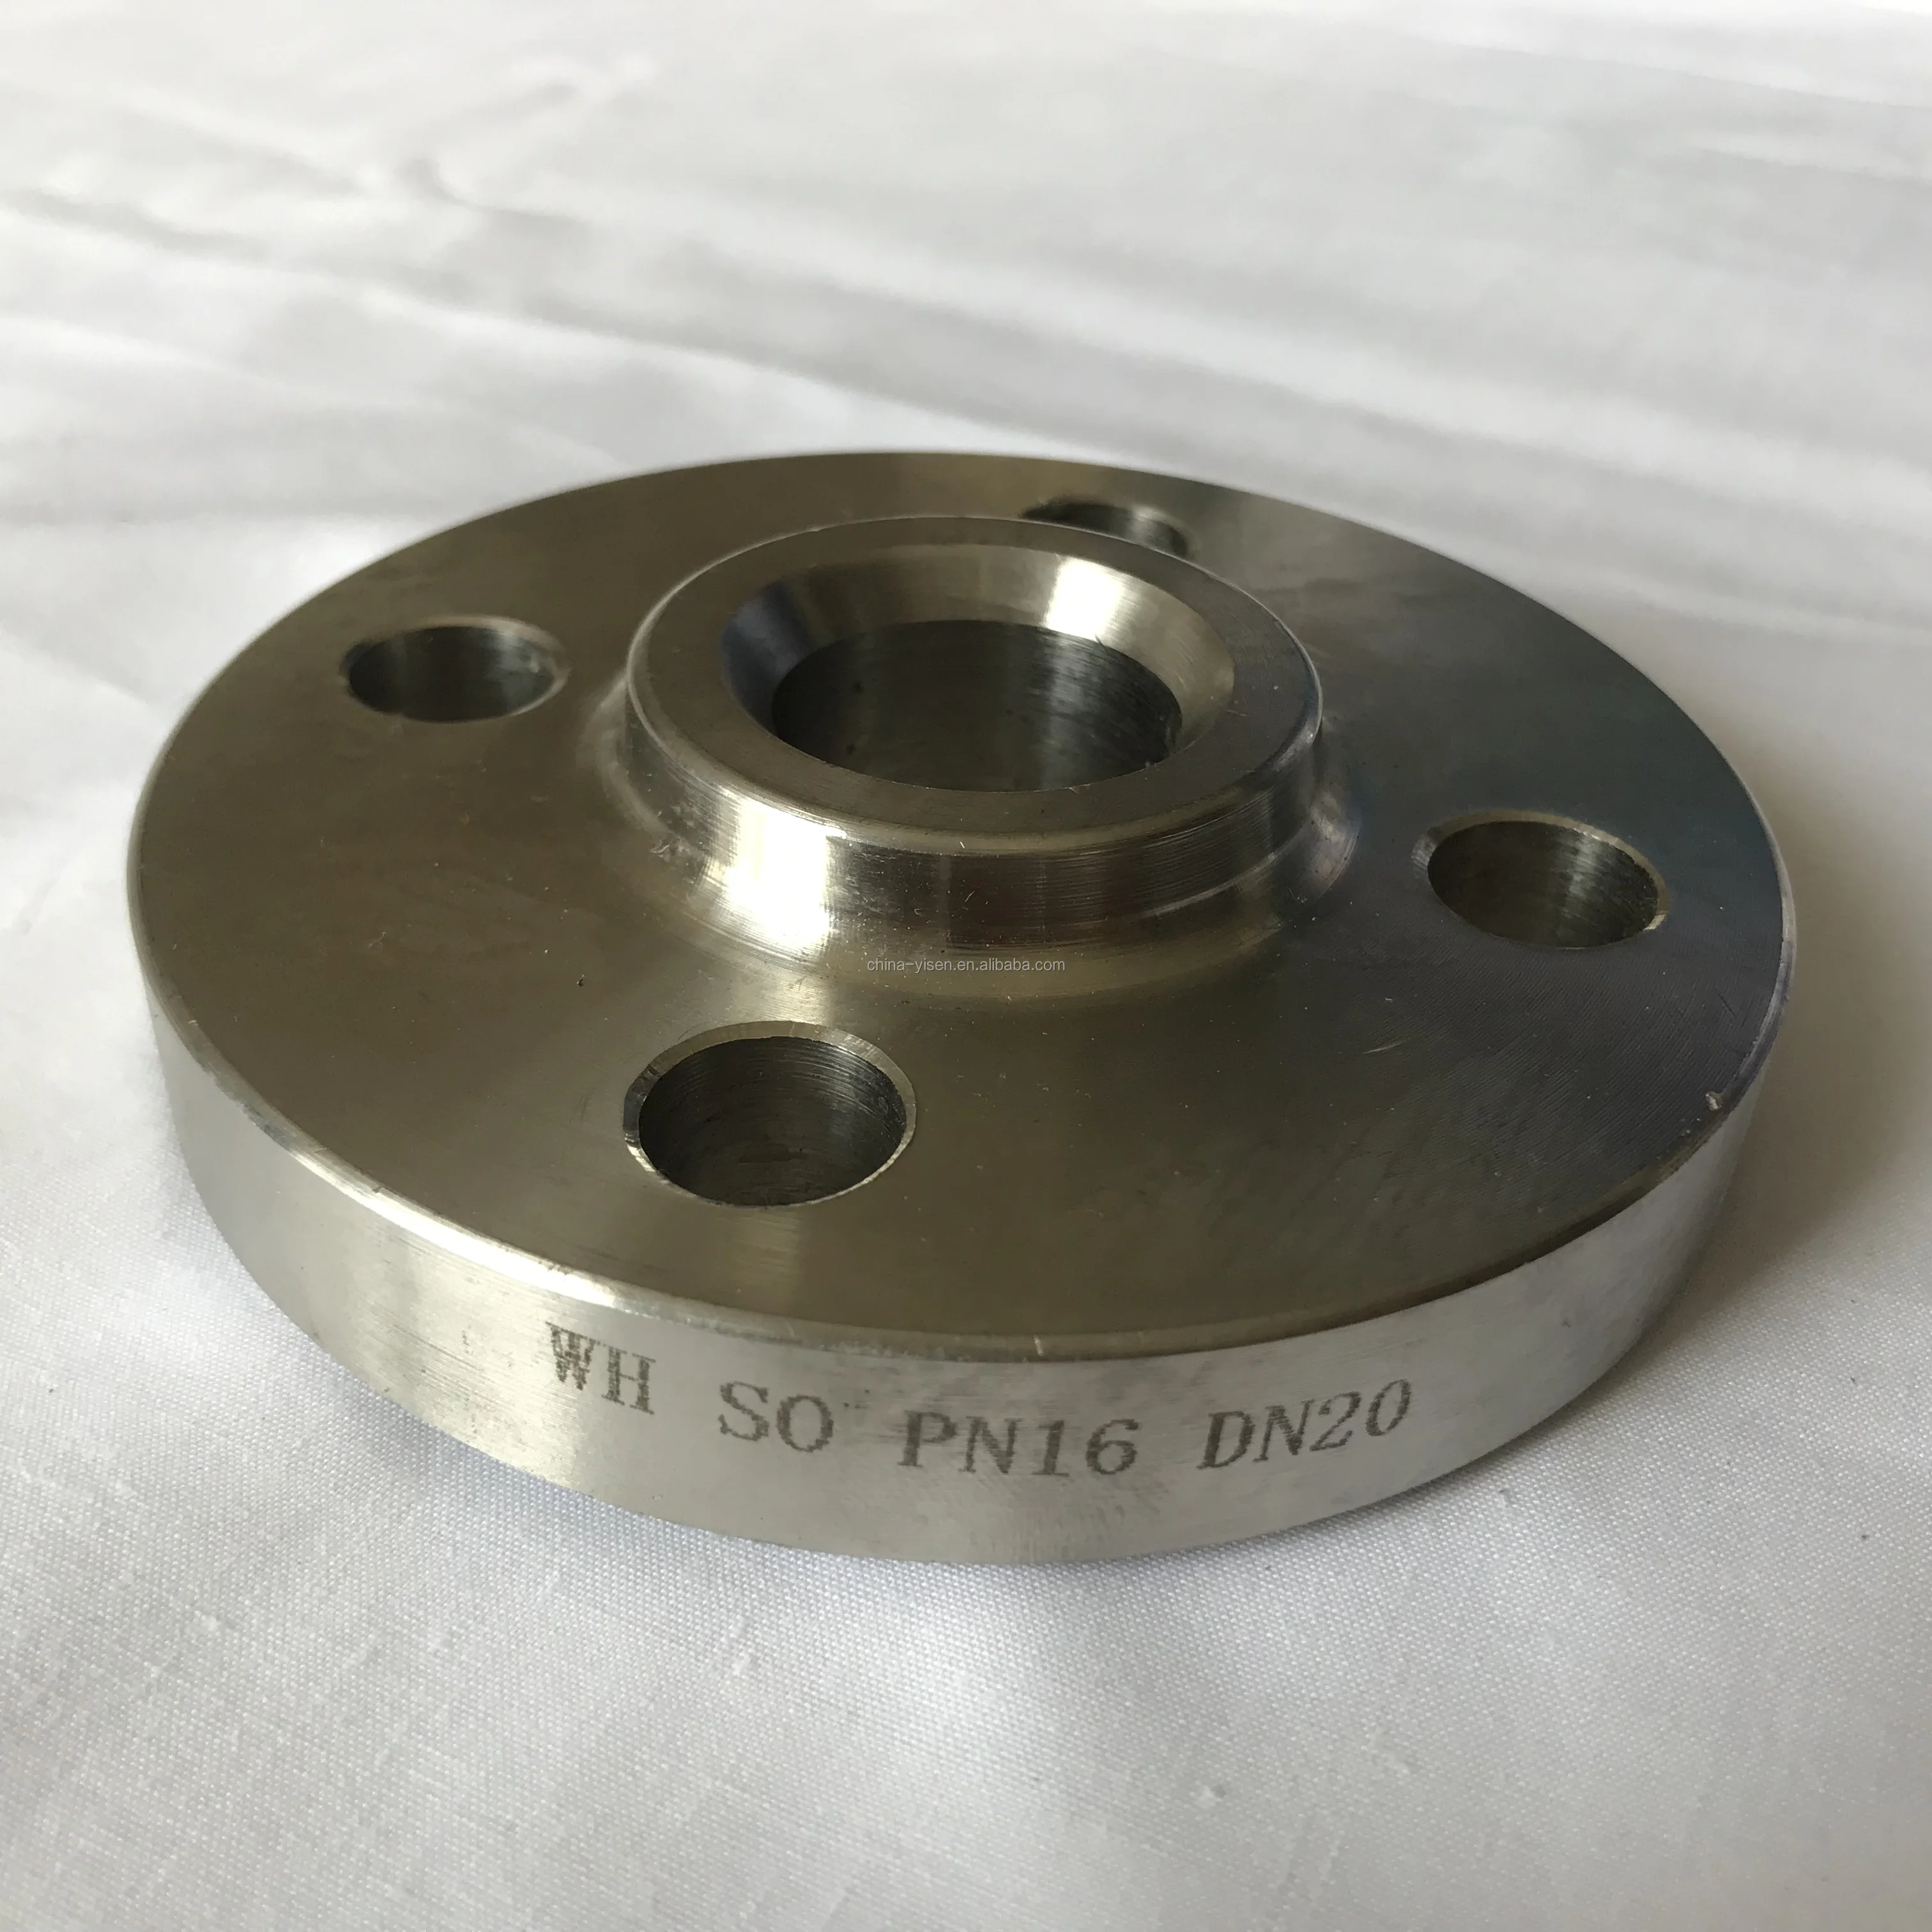 Ansi B165 Cl600 Forged Flanges Stainless Steel Aisi 316316l Slip On Flanges Buy Stainless 0331